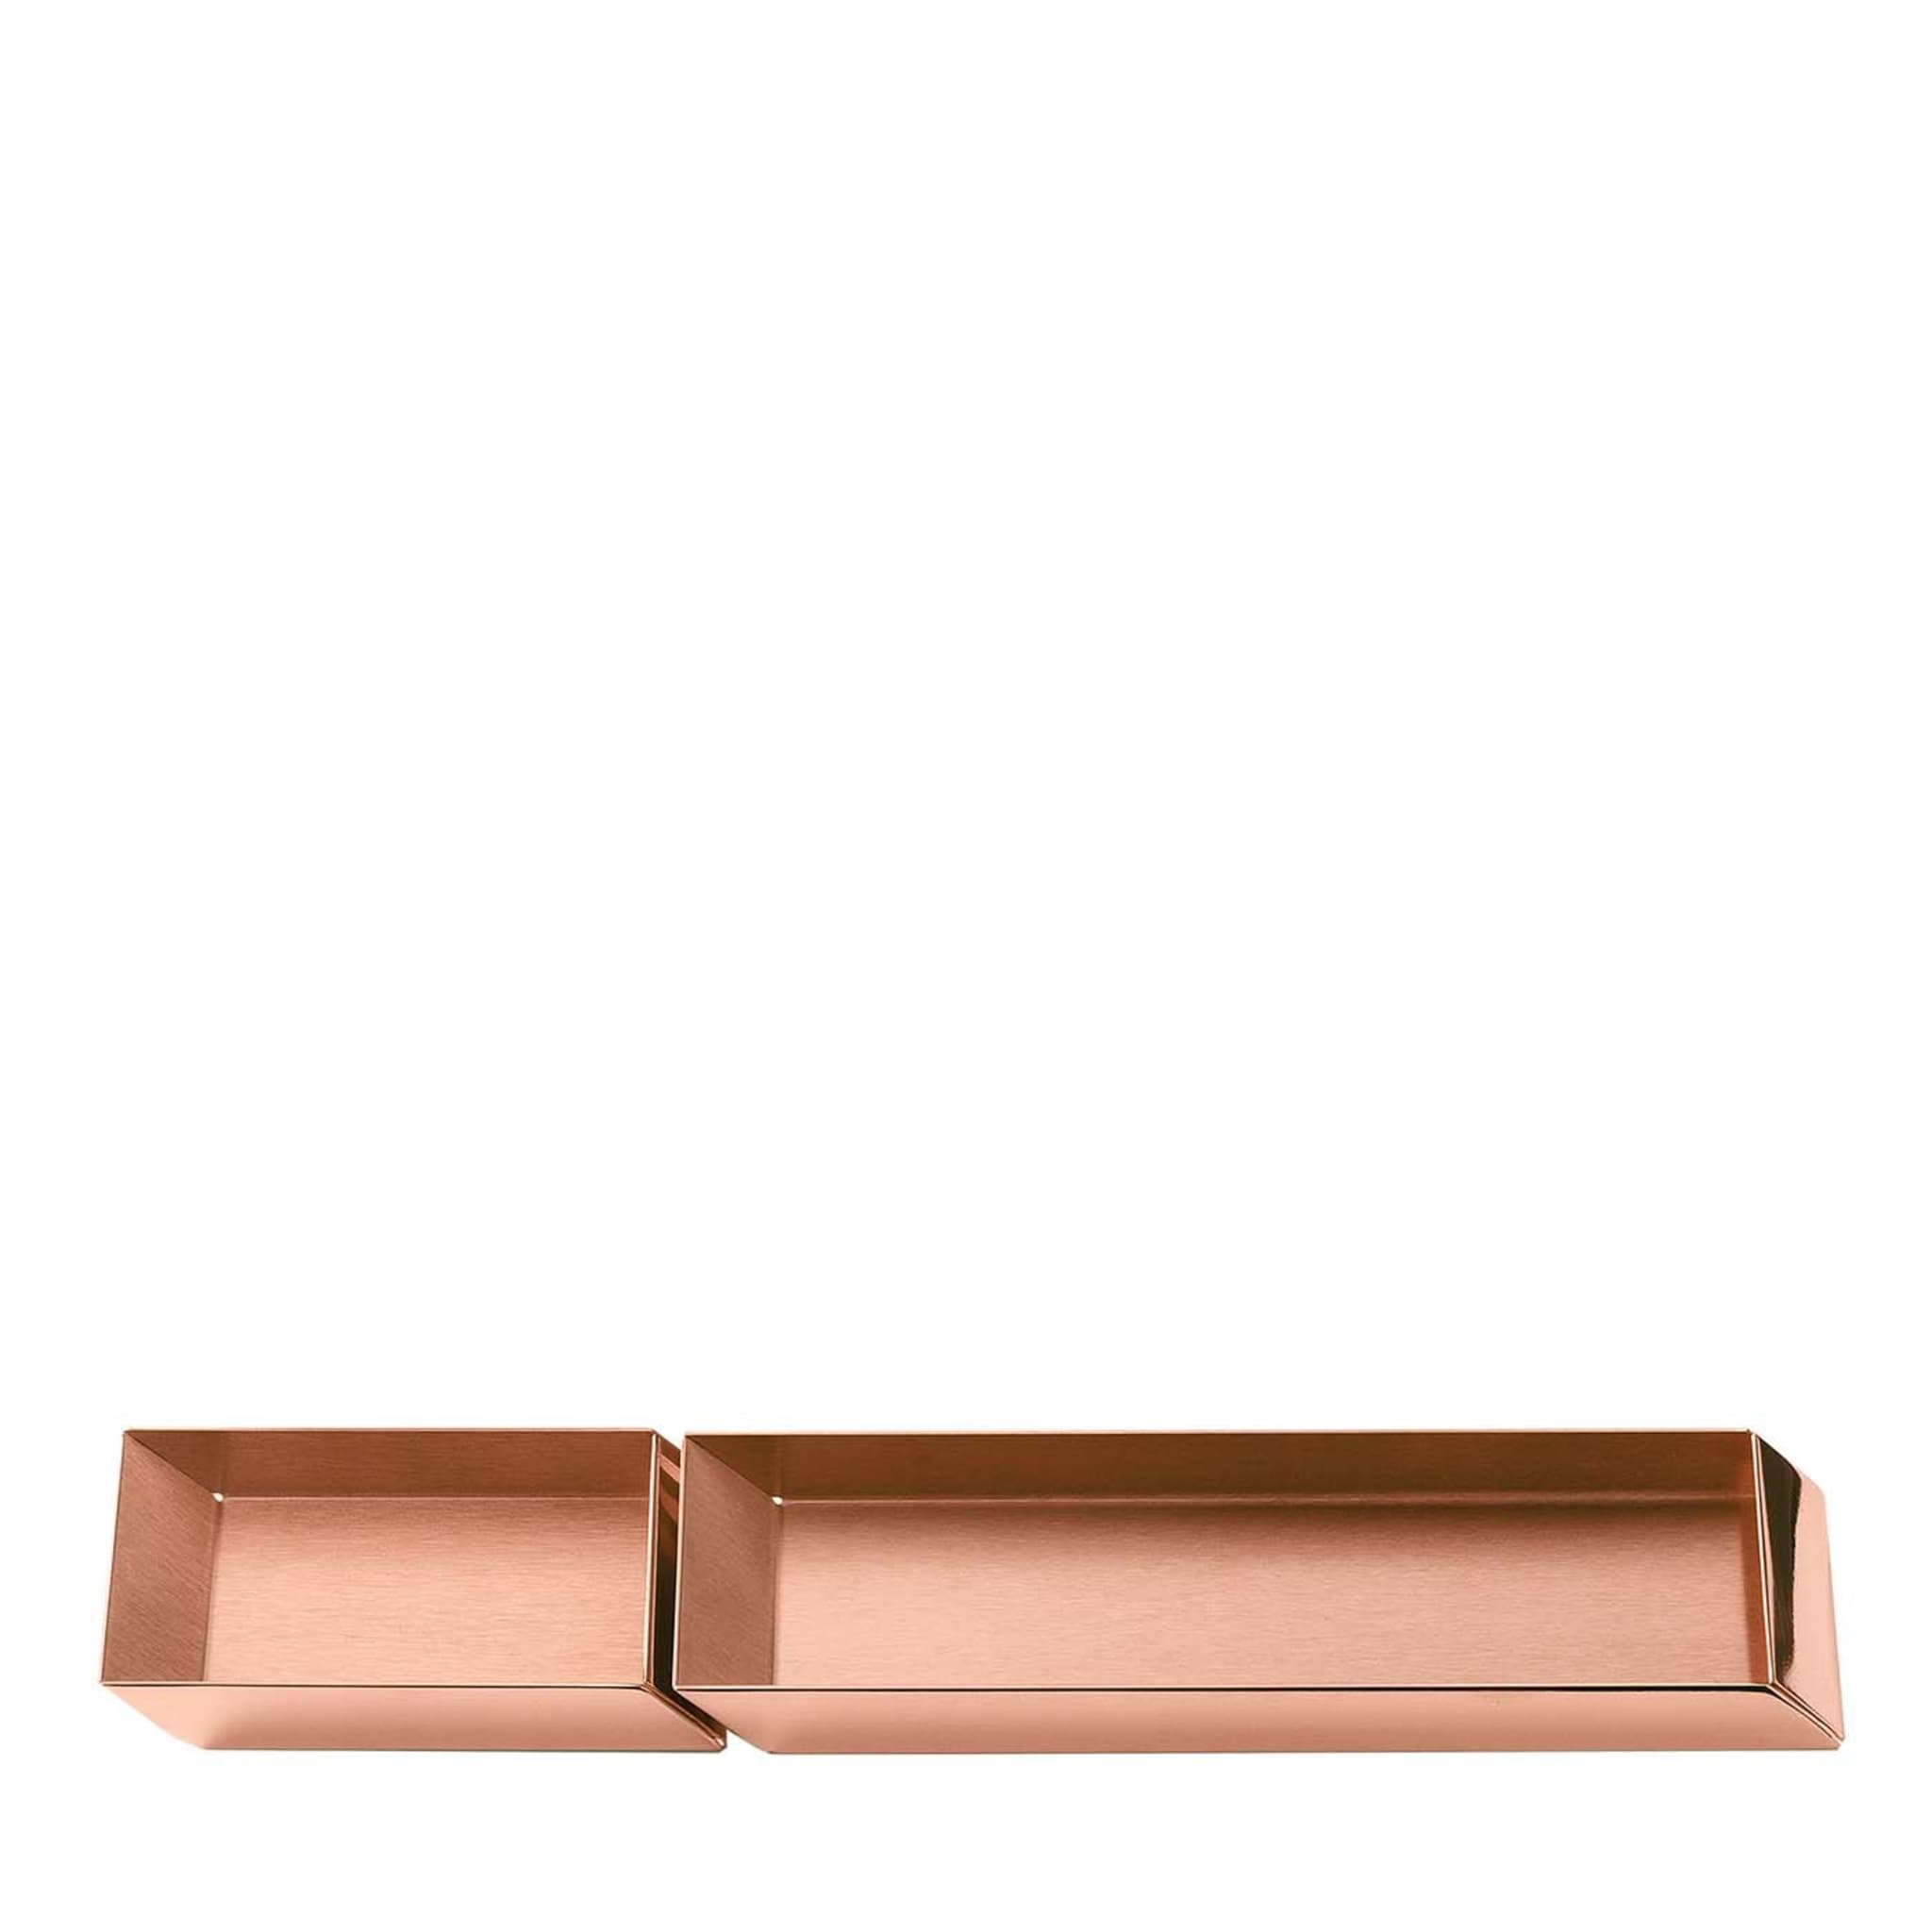 Axonometry Pen & Cards Copper Tray Set by Elisa Giovannoni - Main view